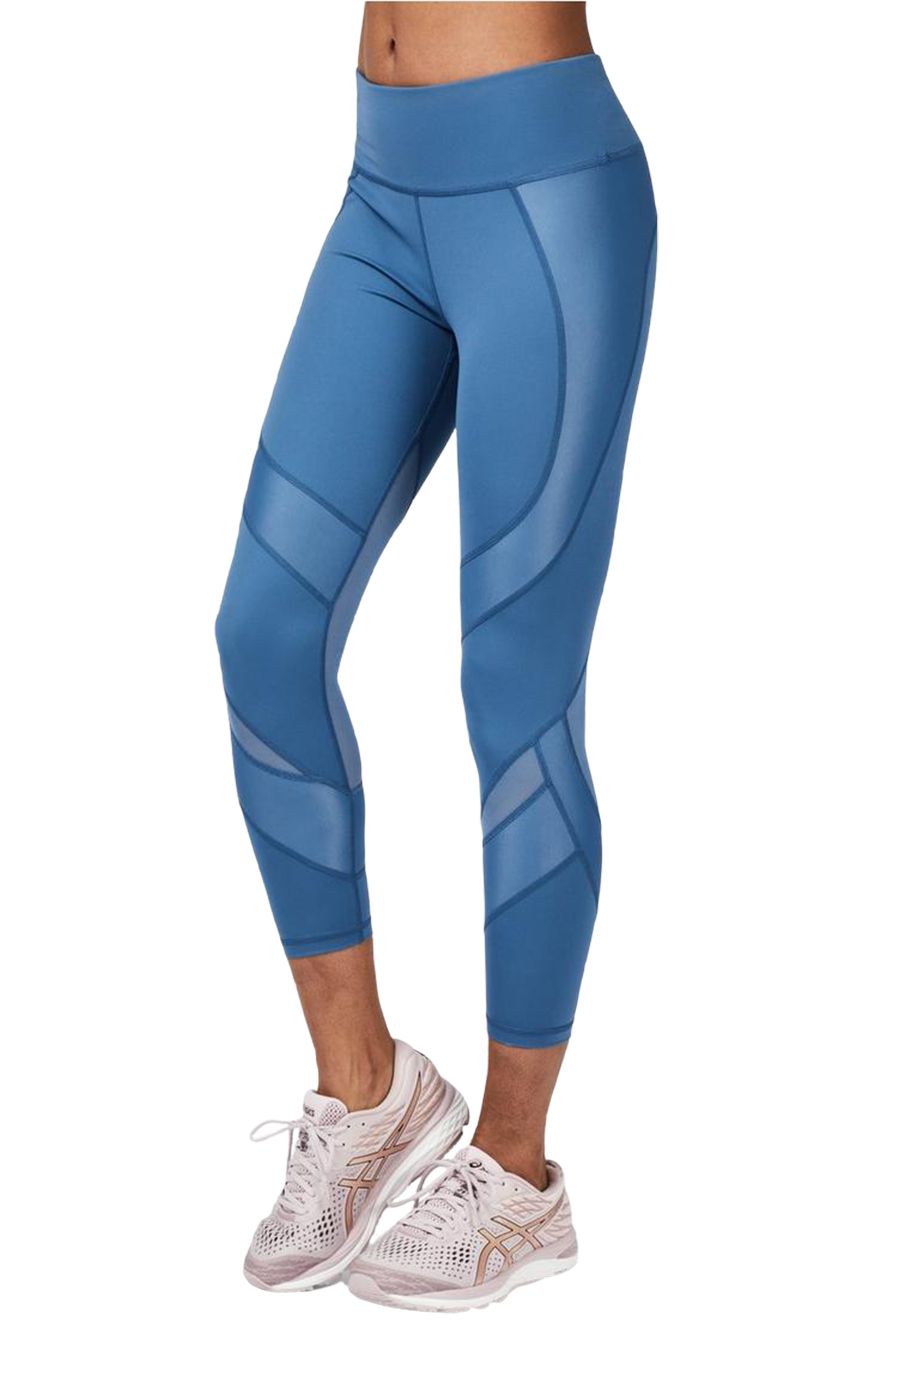 15 Petite Workout Leggings for Every 